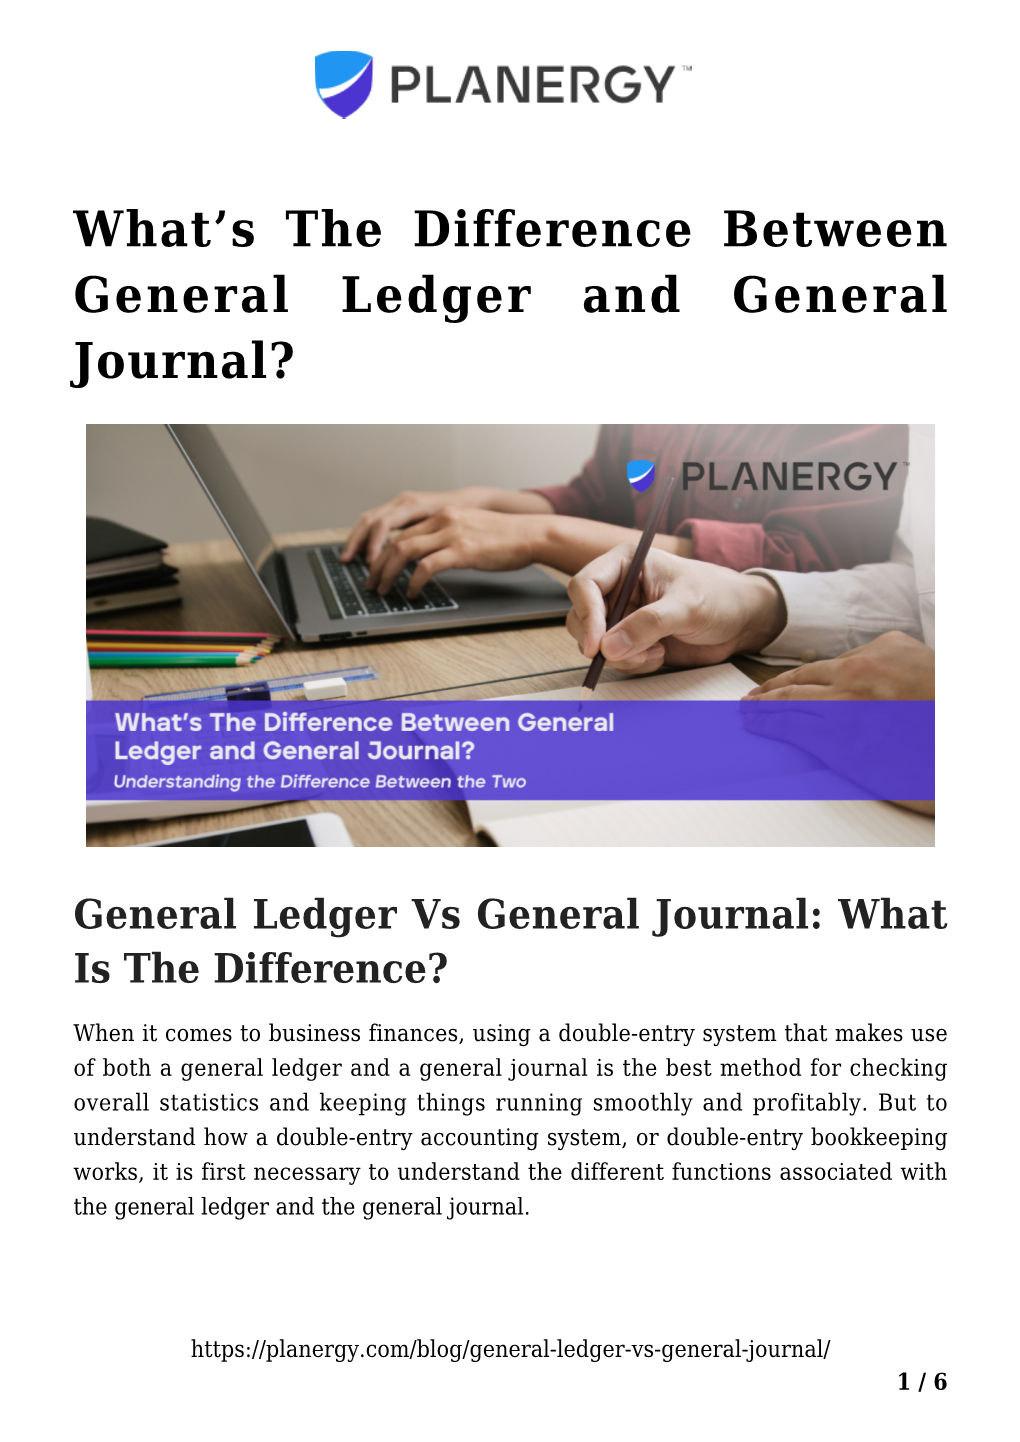 general-ledger-vs-general-journal-what-is-the-difference-docslib